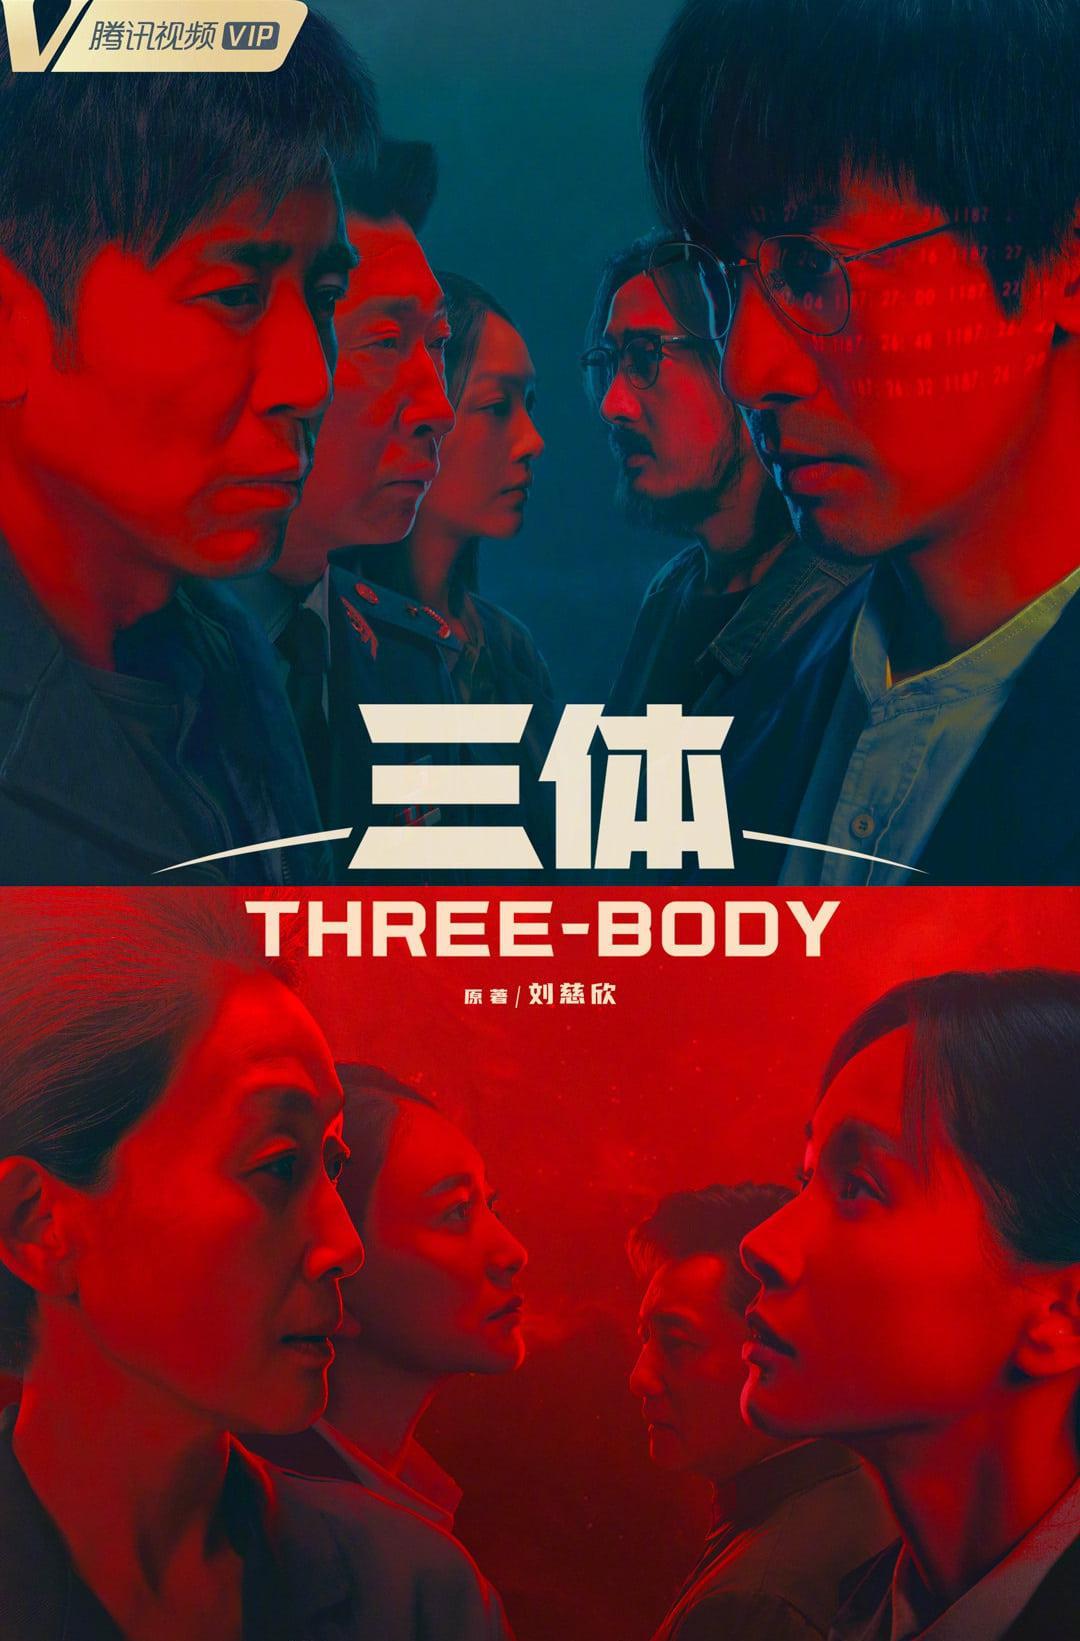 TV ratings for Three-Body (三体) in Mexico. Tencent Video TV series